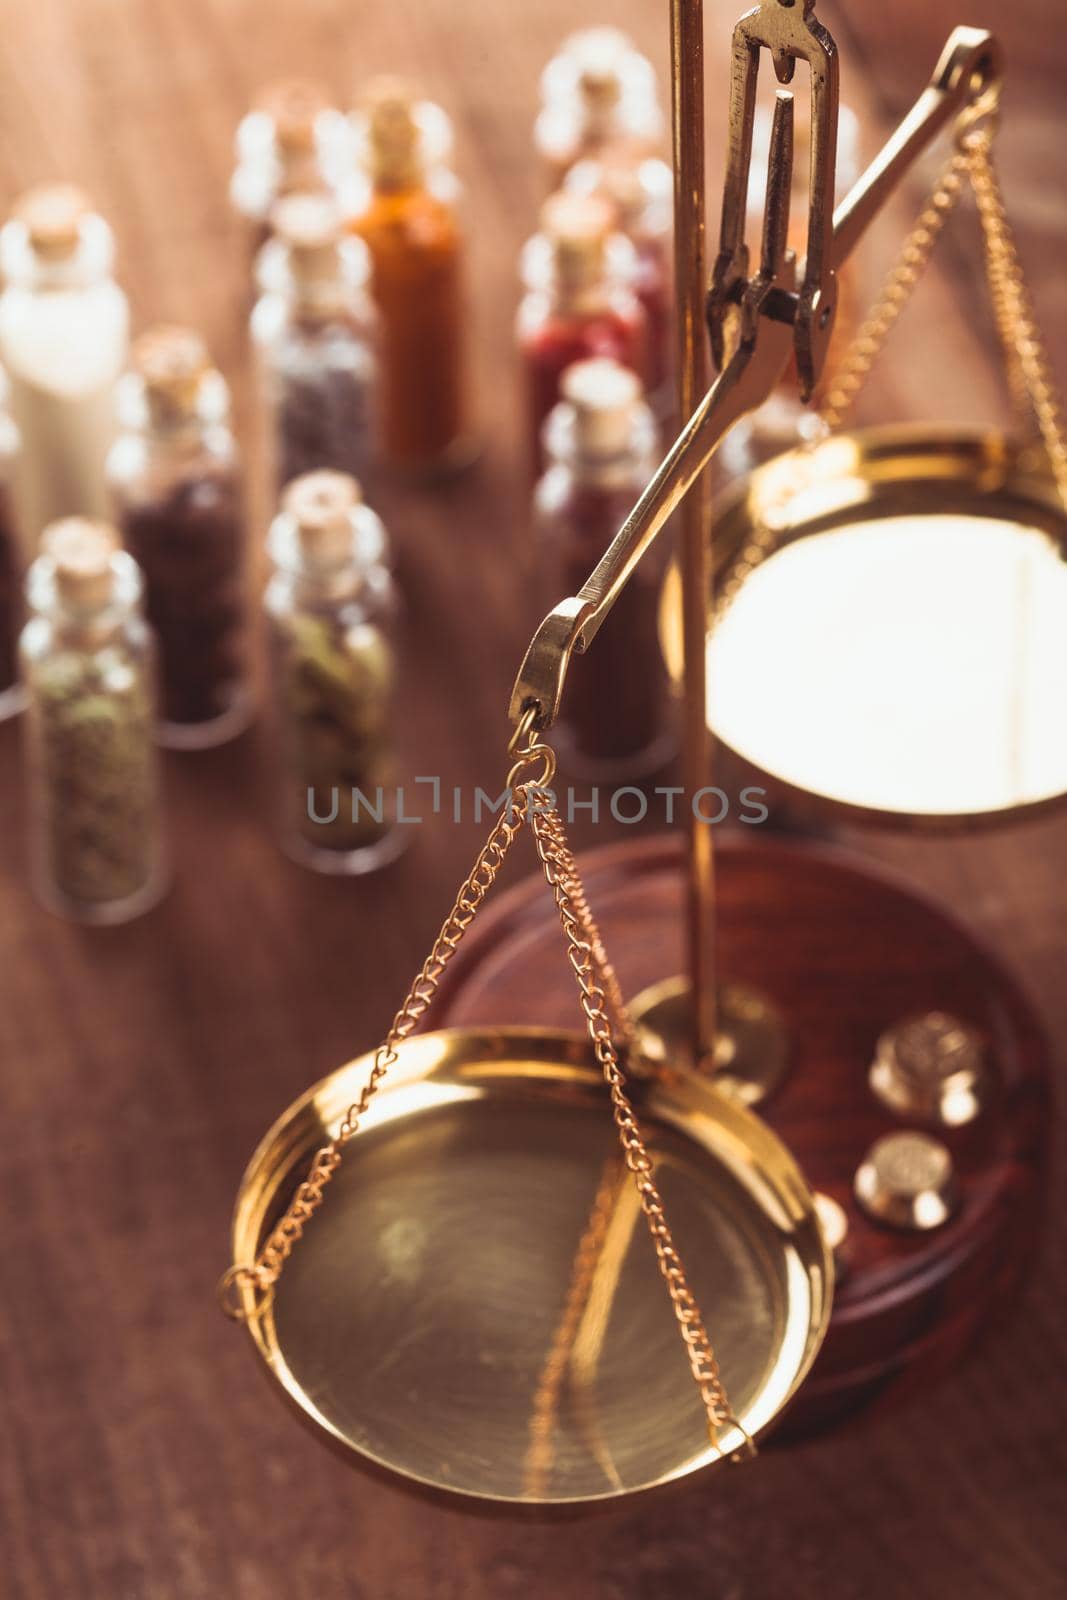 Little bottles with spices and scales on the table